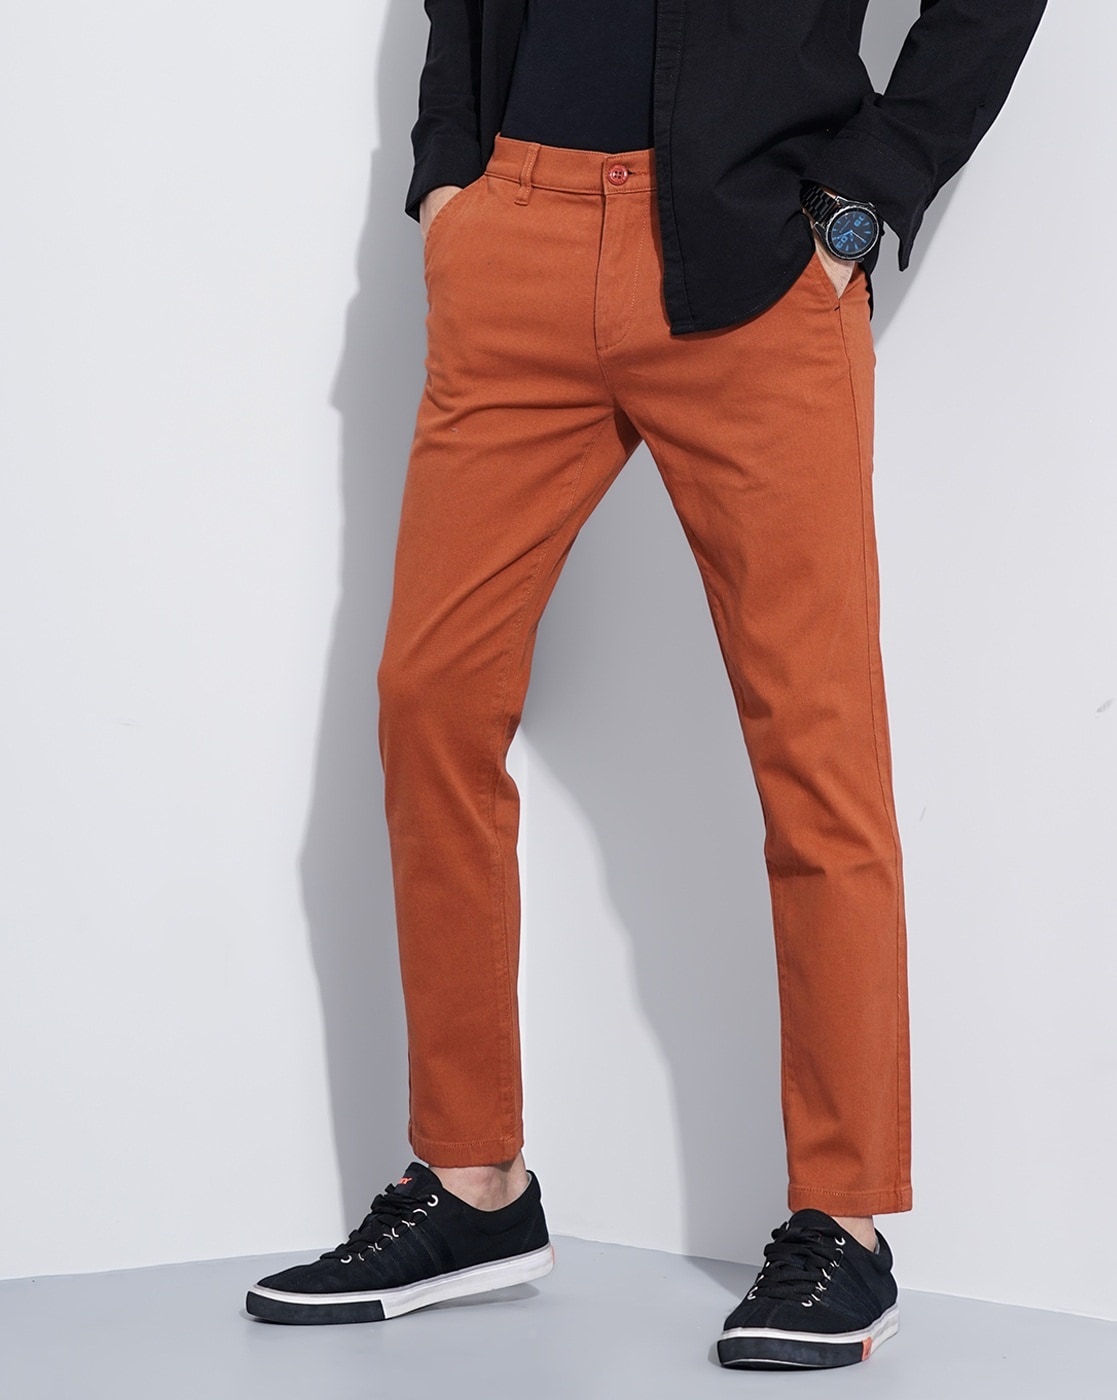 Mens Cotton Orange Cargo Pants Mens With Multiple Pockets And Ankle Band  Orange And Black Spring Joggers For Comfortable Casual Wear LJ201104 From  Jiao02, $44.54 | DHgate.Com